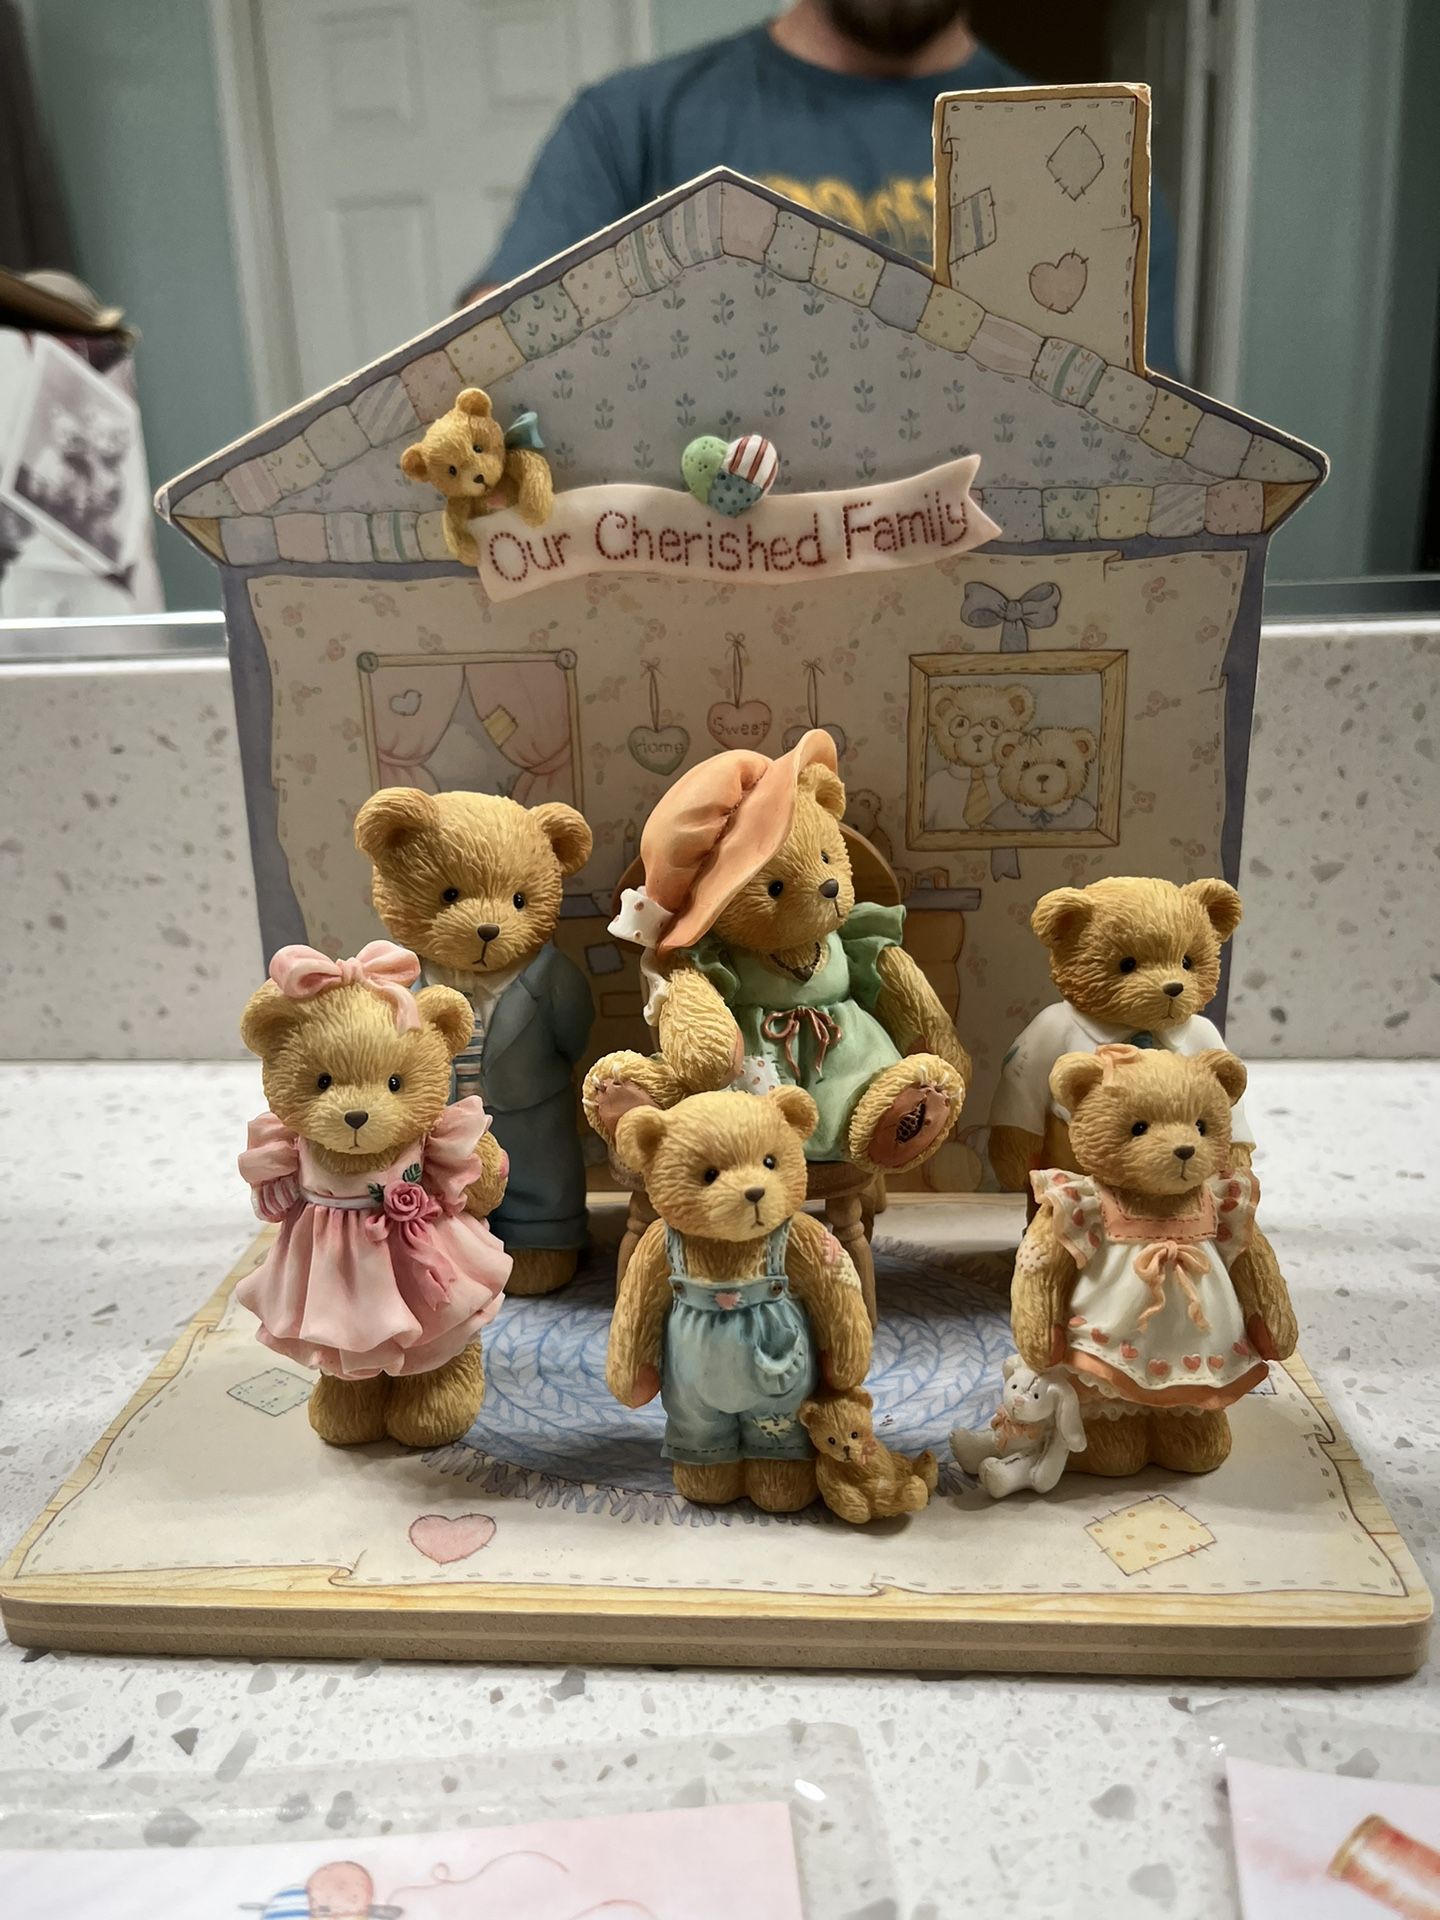 Cherished Teddies “Our Cherished Family” By Enesco Collectible Set Of Ceramic Bears